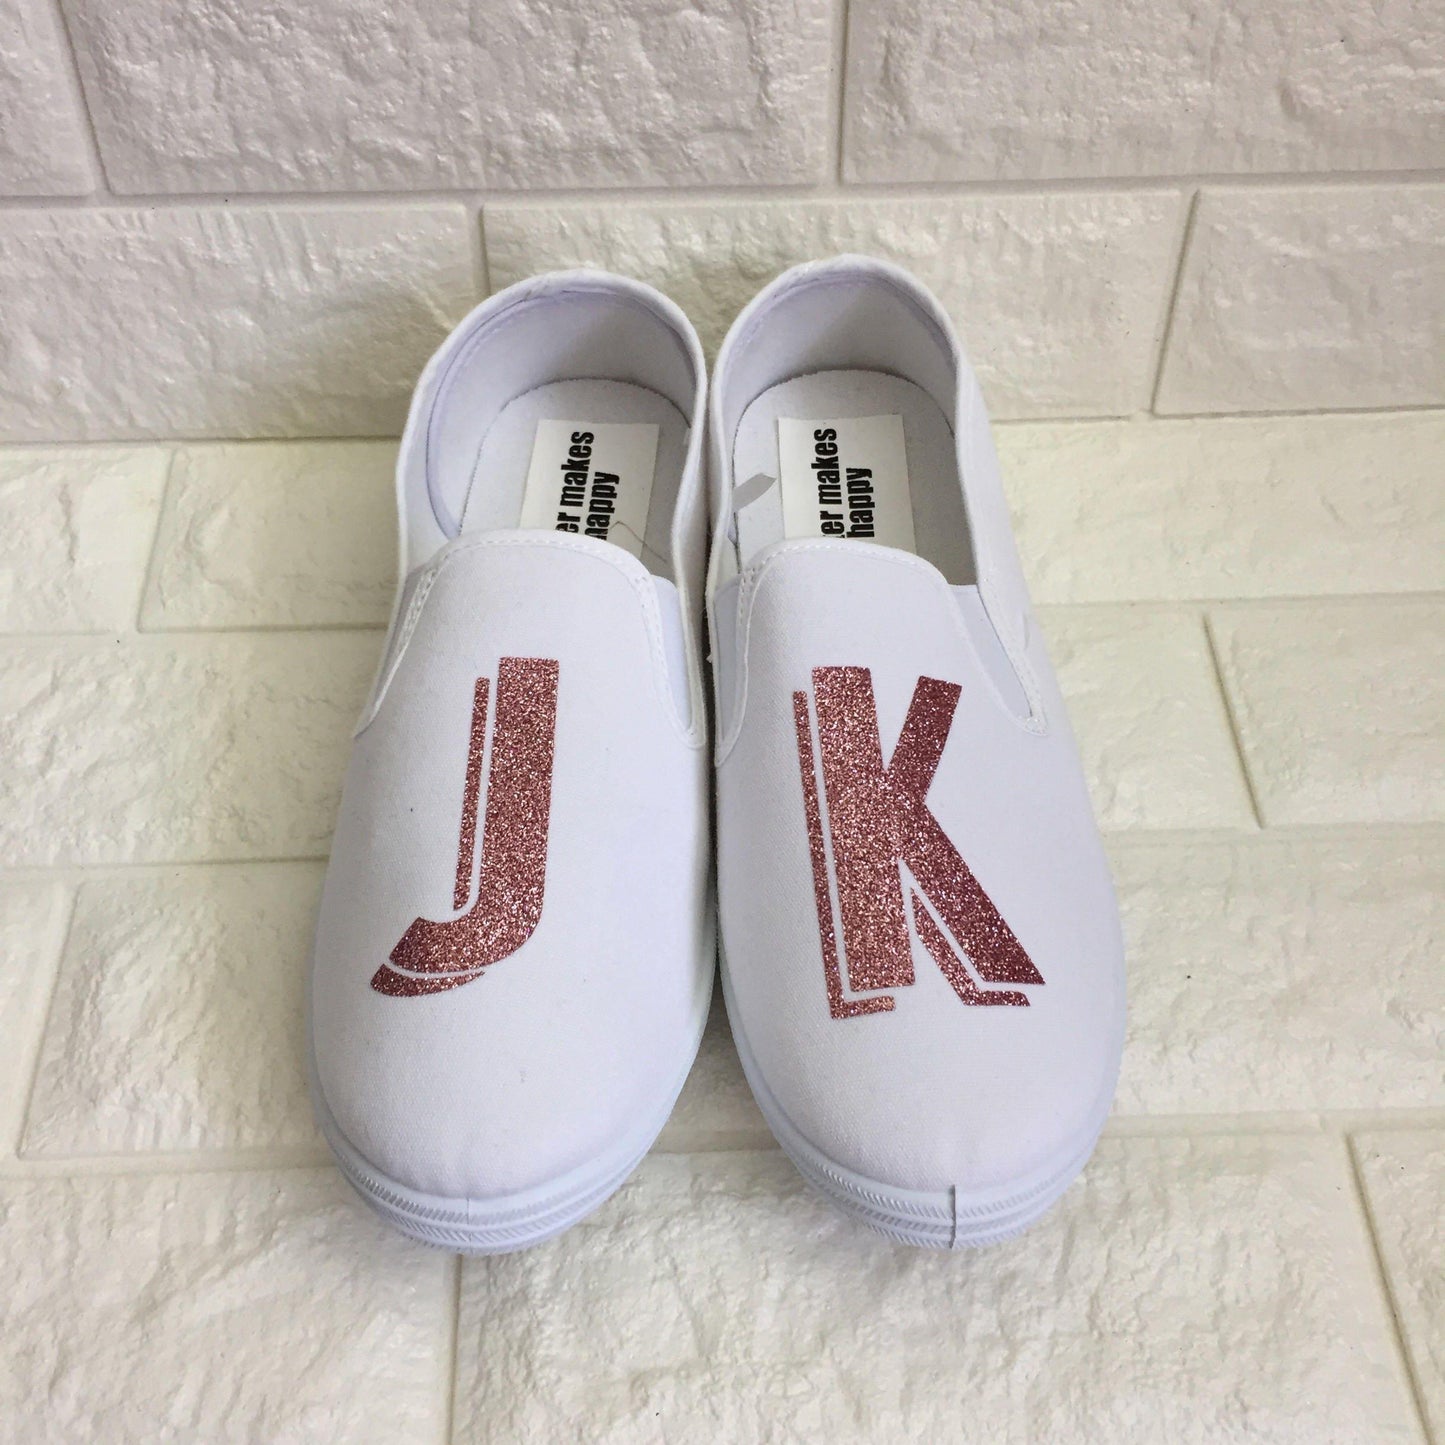 Customized Initial Monogram Shoes-Shoes-ButterMakesMeHappy